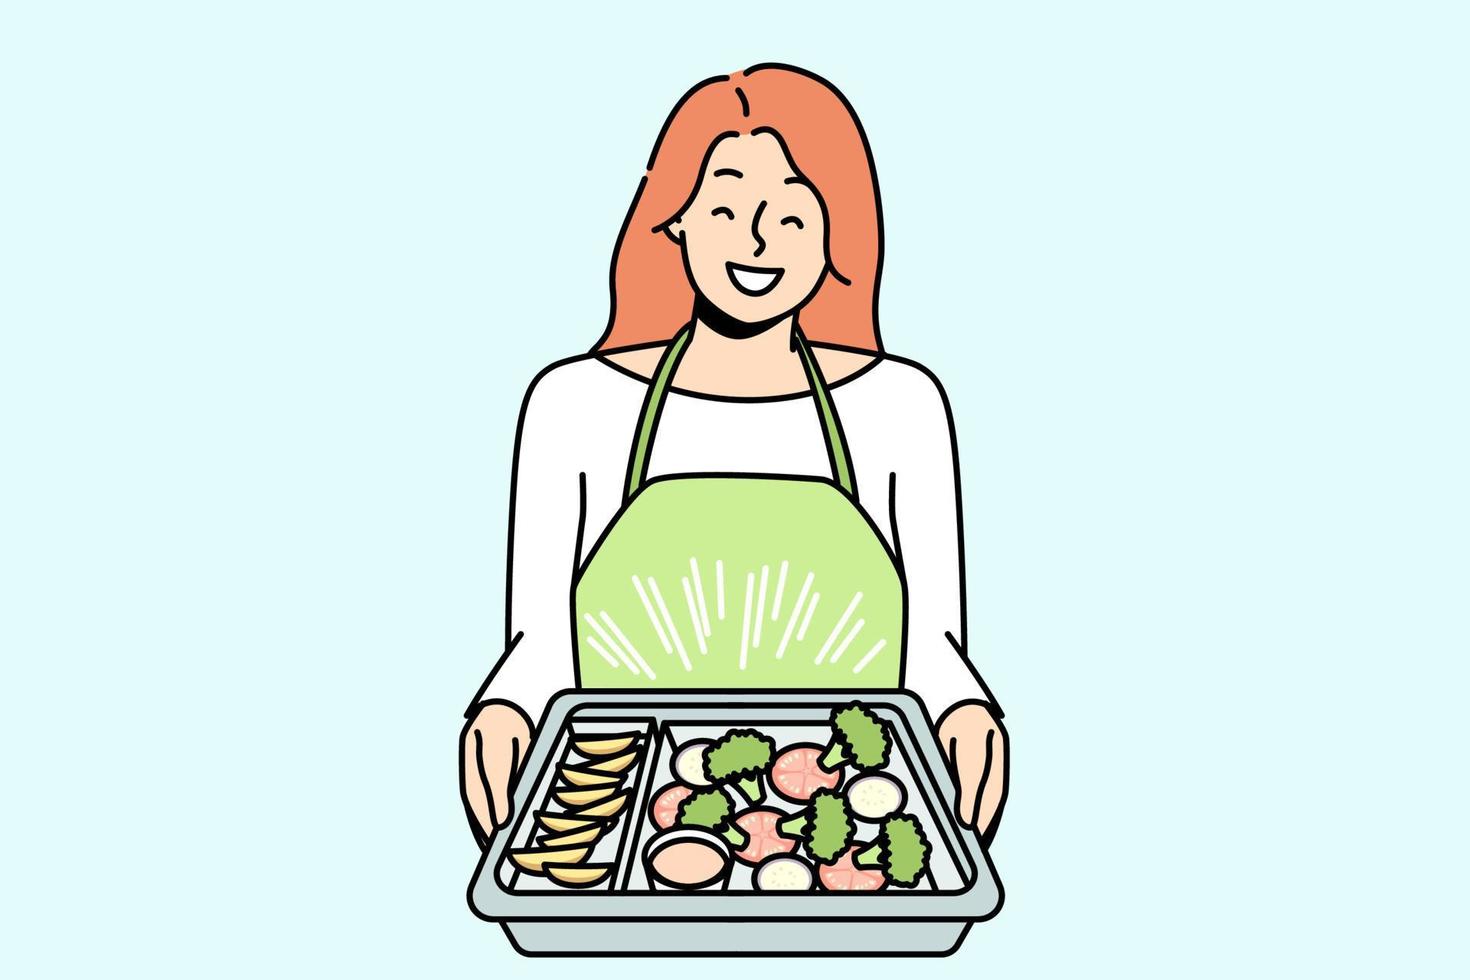 Smiling woman in apron holding tray with delicious food baking. Happy housewife cooking meal at home. Diet and nutrition. Vector illustration.